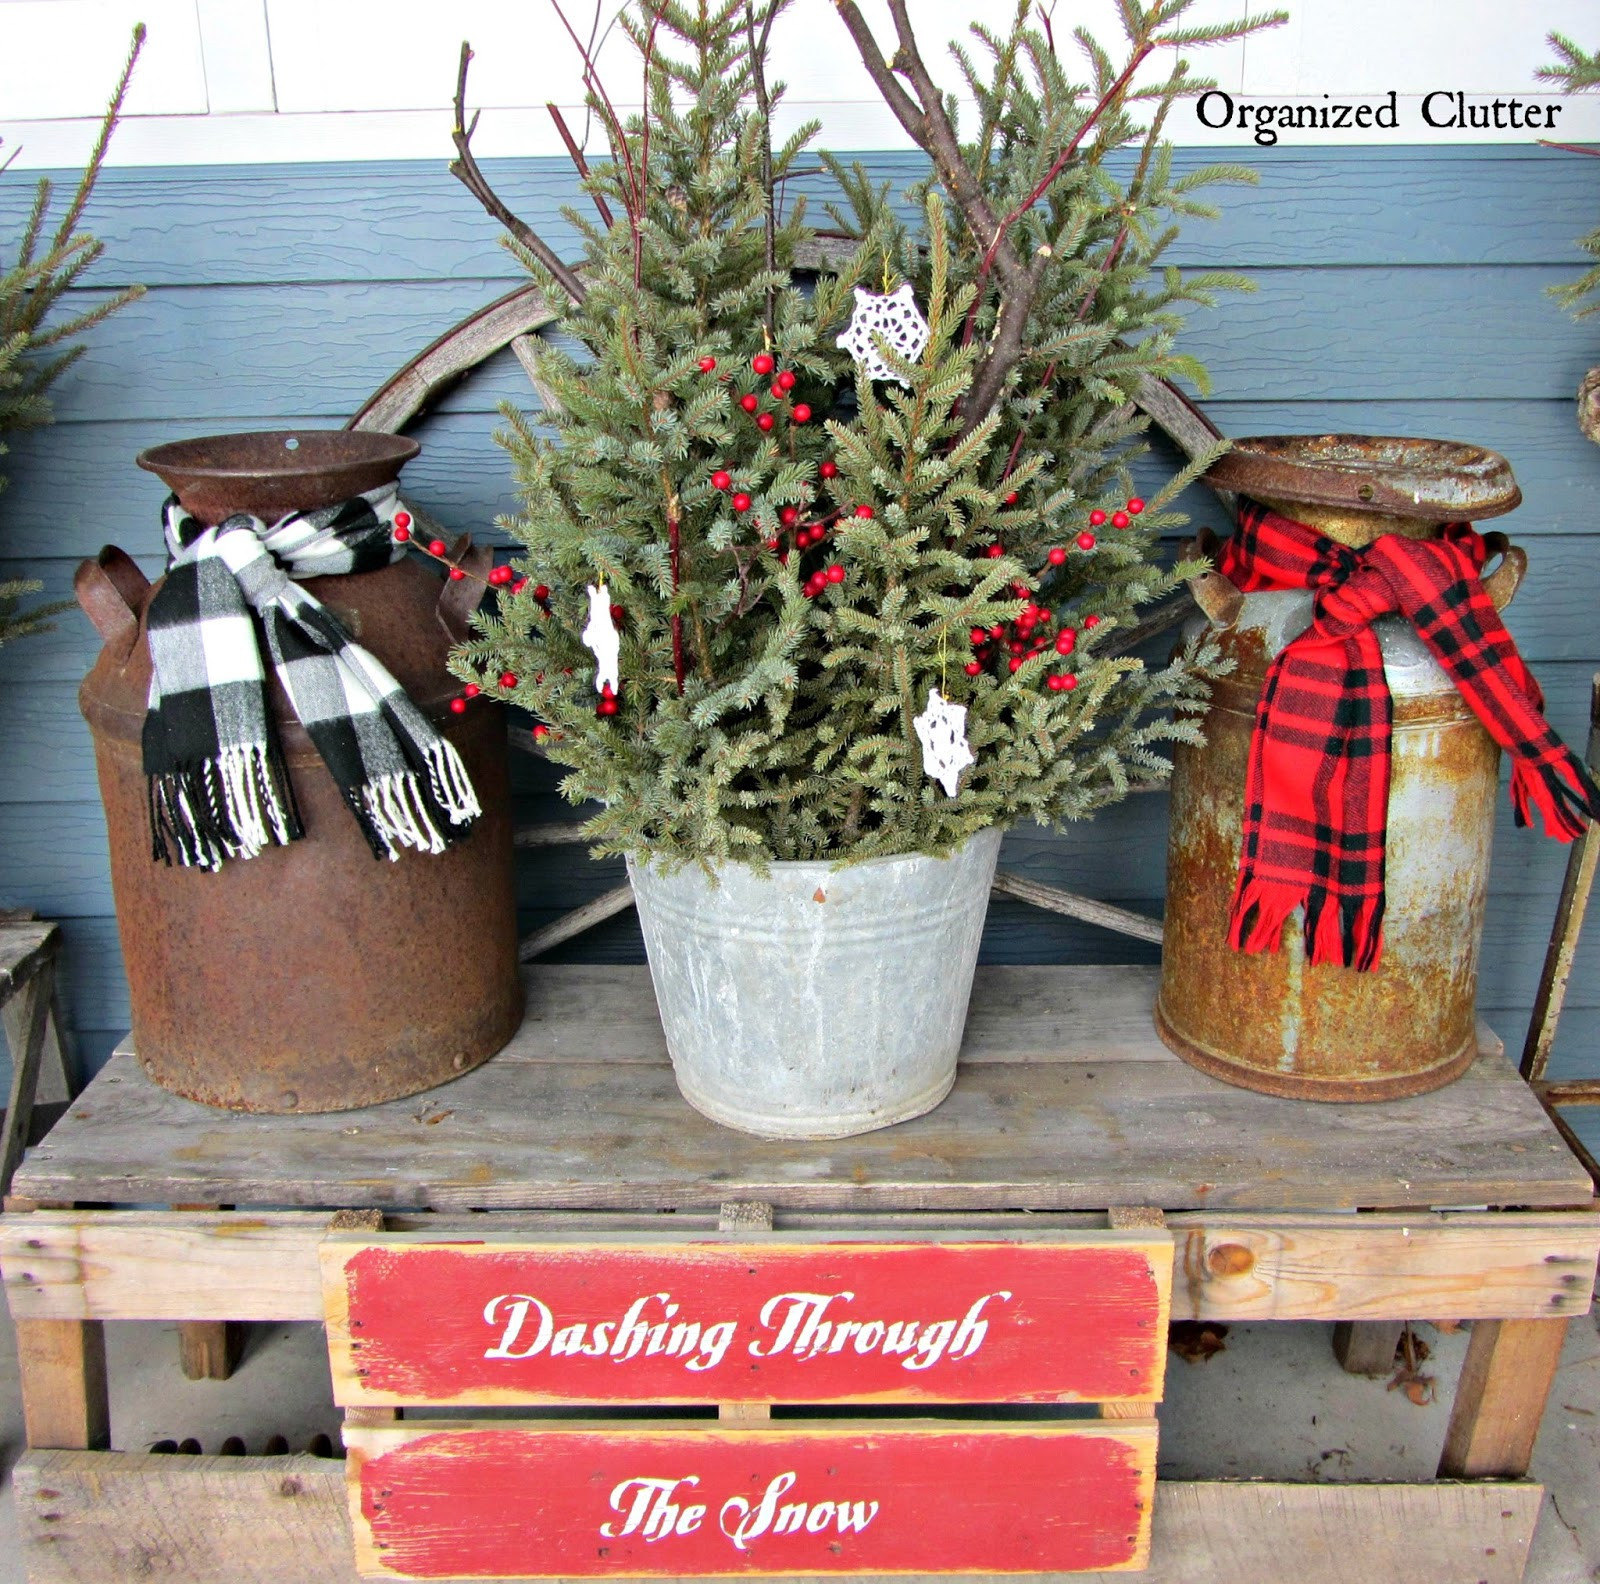 Outdoor Christmas Decorations
 JUNKERS UNITE With An Outdoor Rustic Christmas Vignette